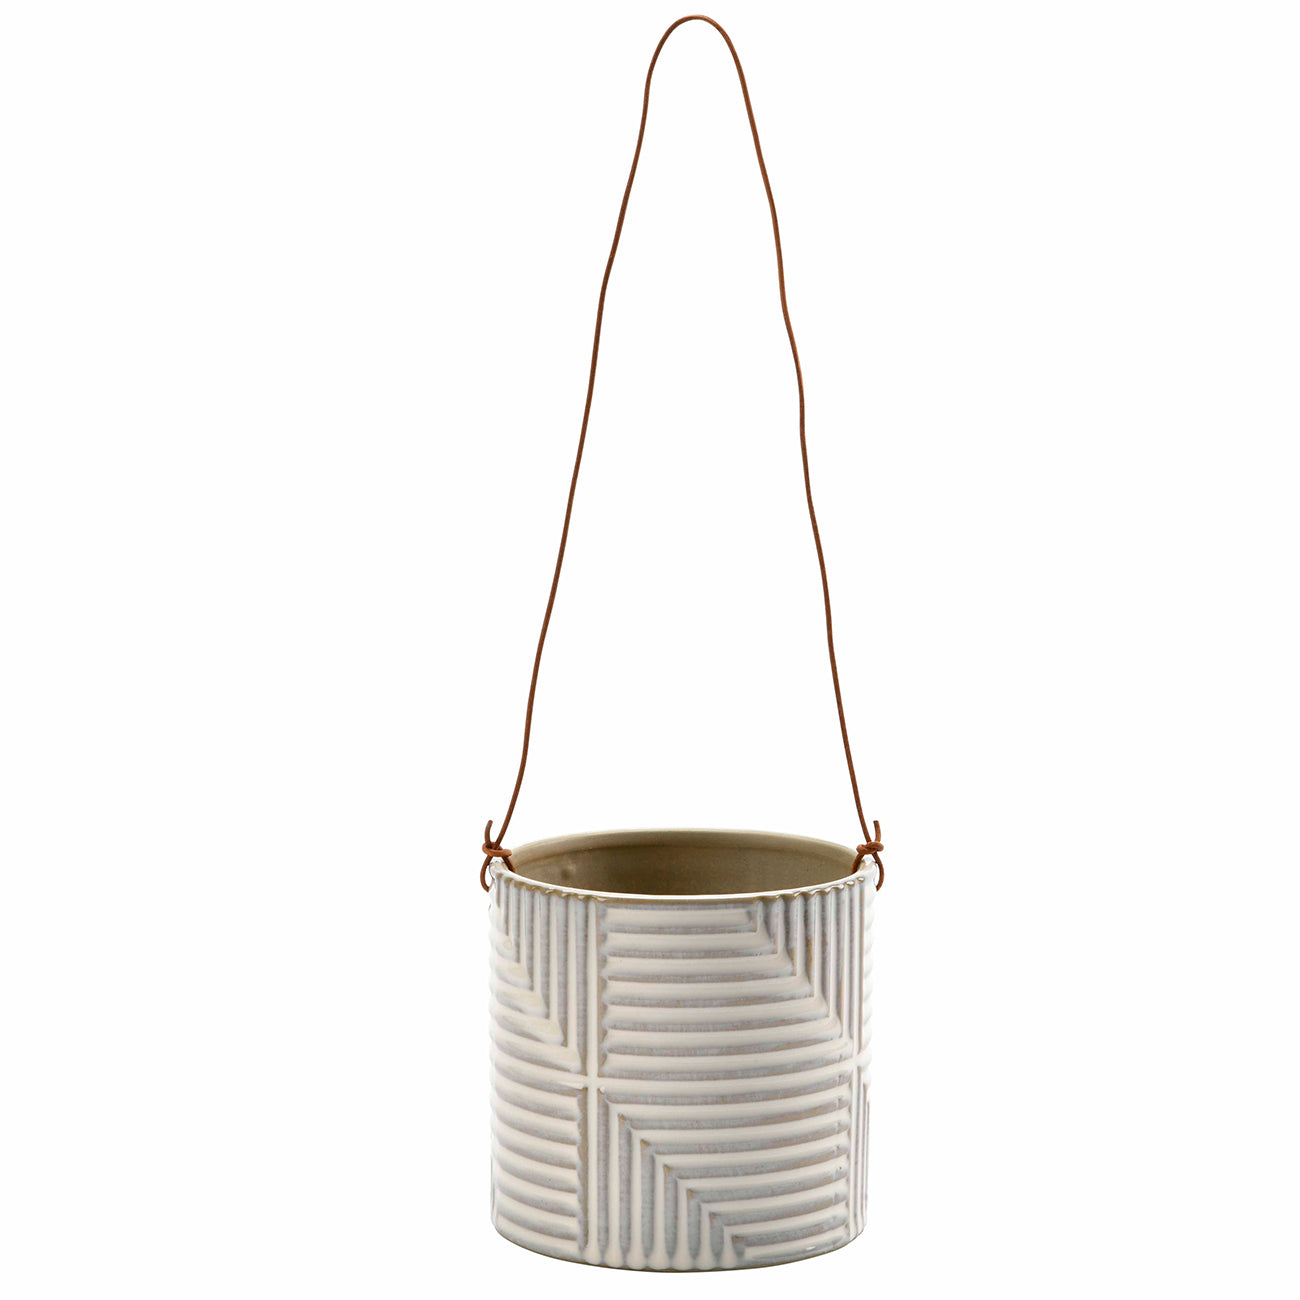 Ceramic Hanging Pot with Leather Cord